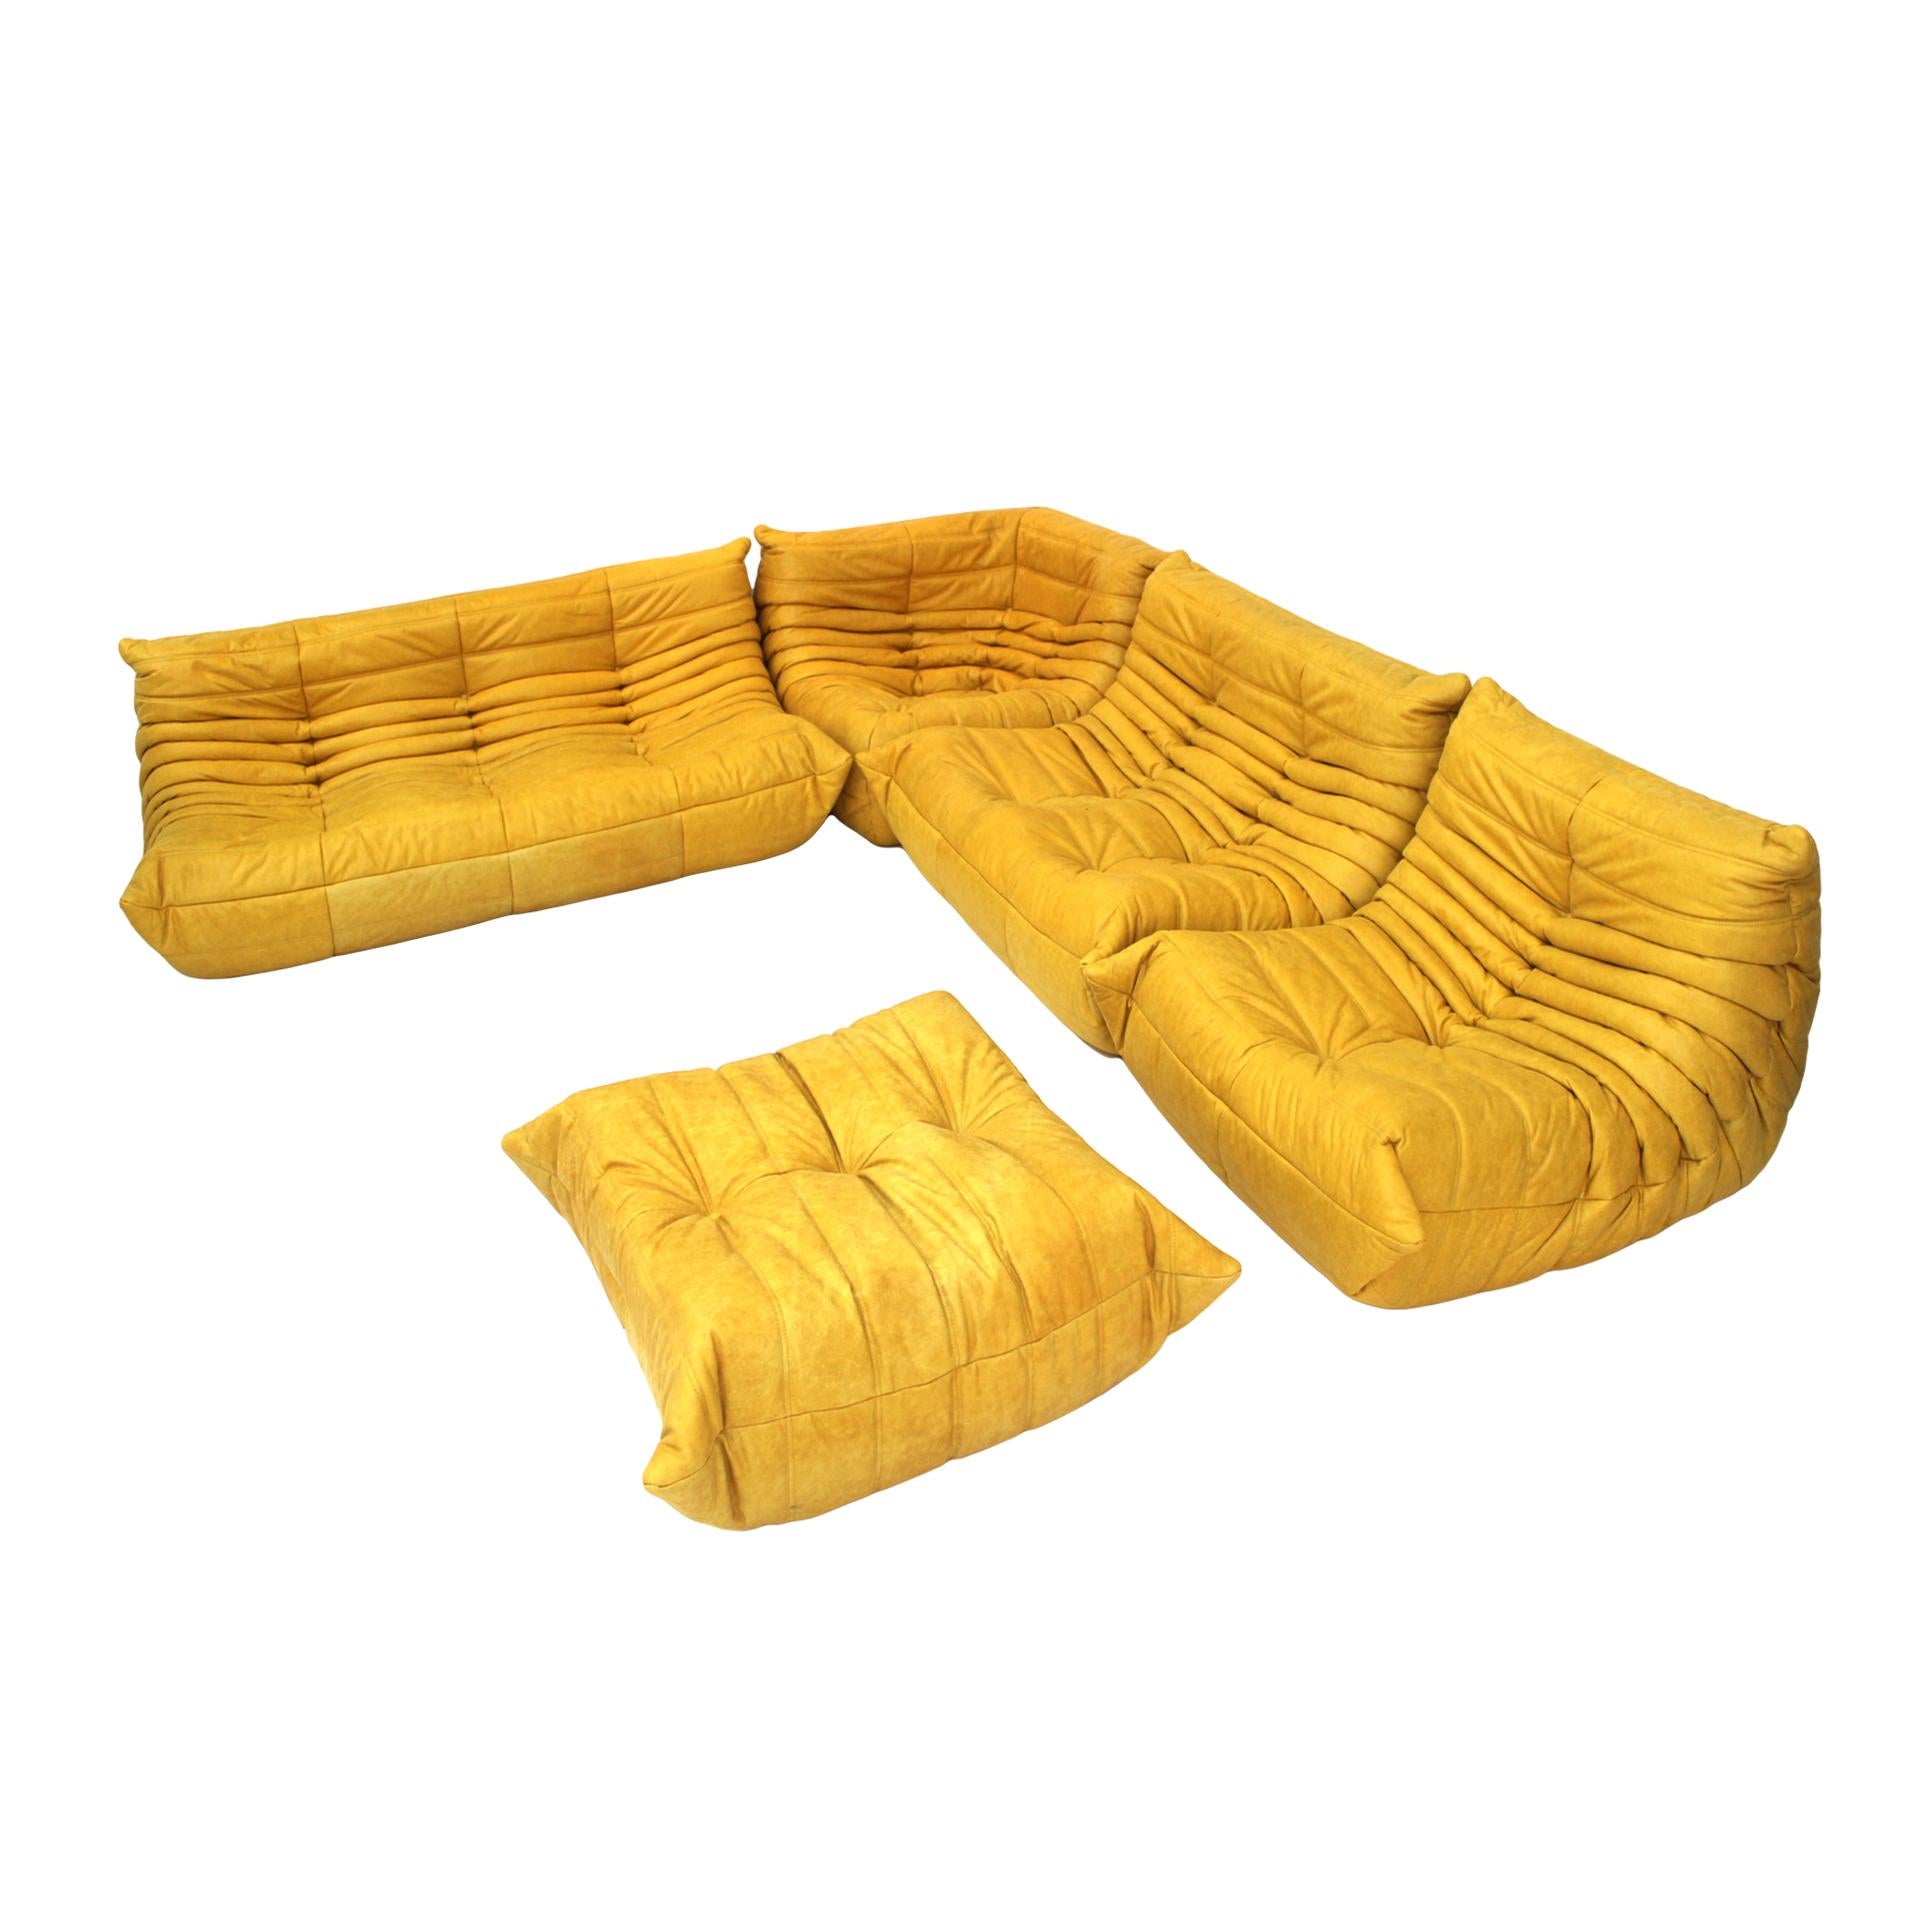 Set mod. Togo designed by Michel Ducaroy for Ligne Roset. Reupholstered in yellow leather. France 70's.

Dimensions: W265 x D 190 x H 35 / 70 cm

Double armchair size: W 120 x D 100 x H 35 / 70 cm
Corner sofa: W 100 x D 100 x H 35 / 70 cm (1 item) D